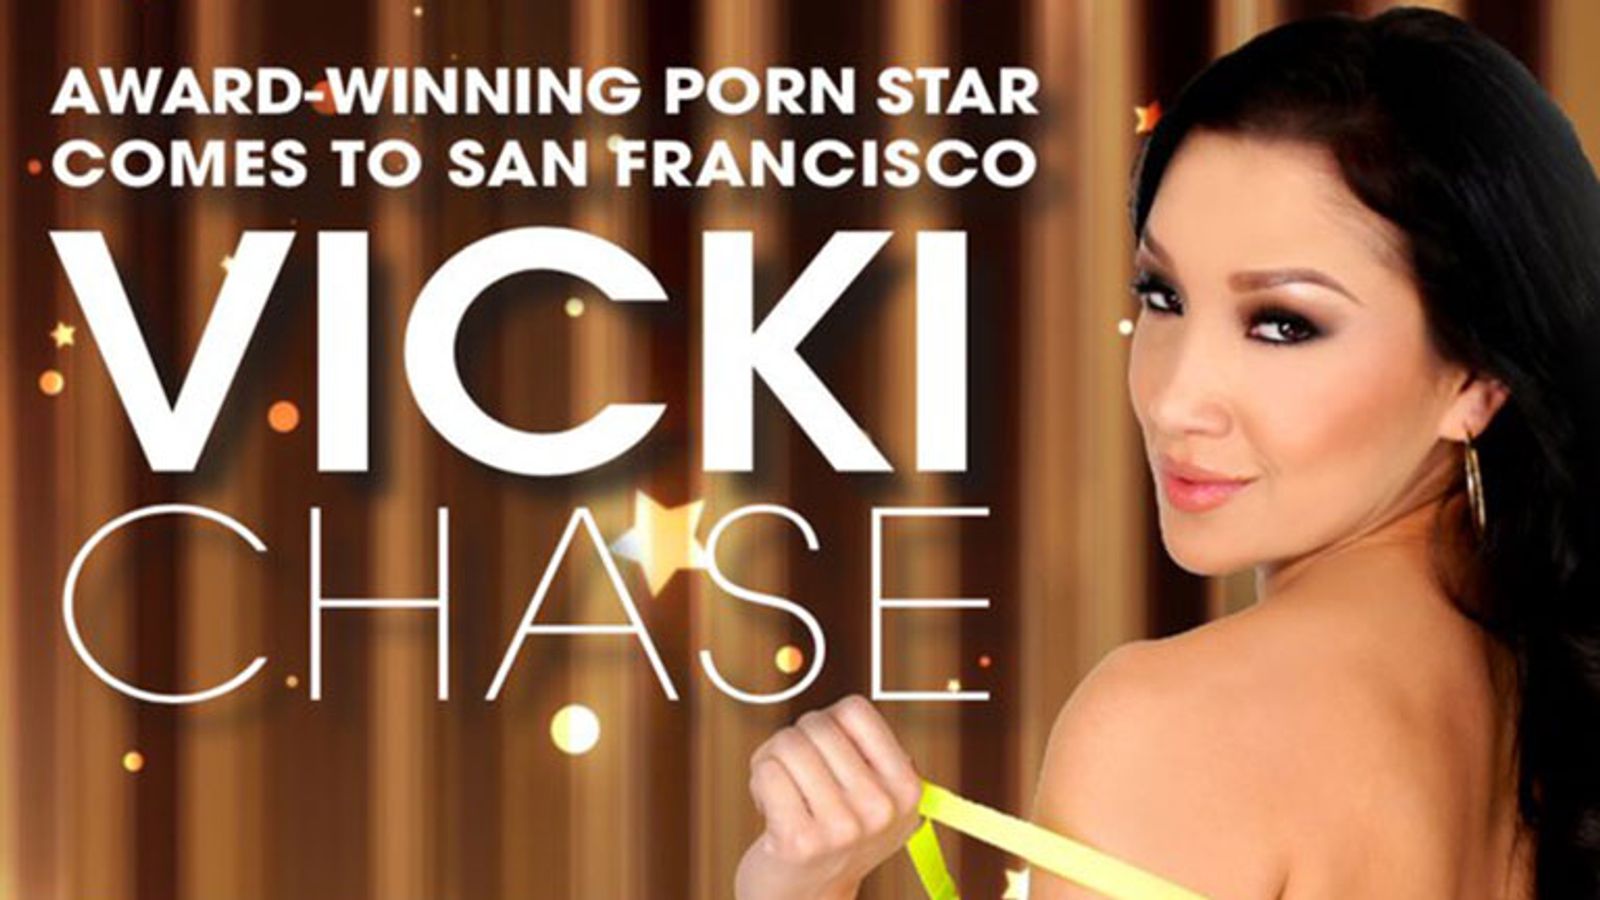 Vicki Chase Returns to San Francisco's  Crazy Horse This Week